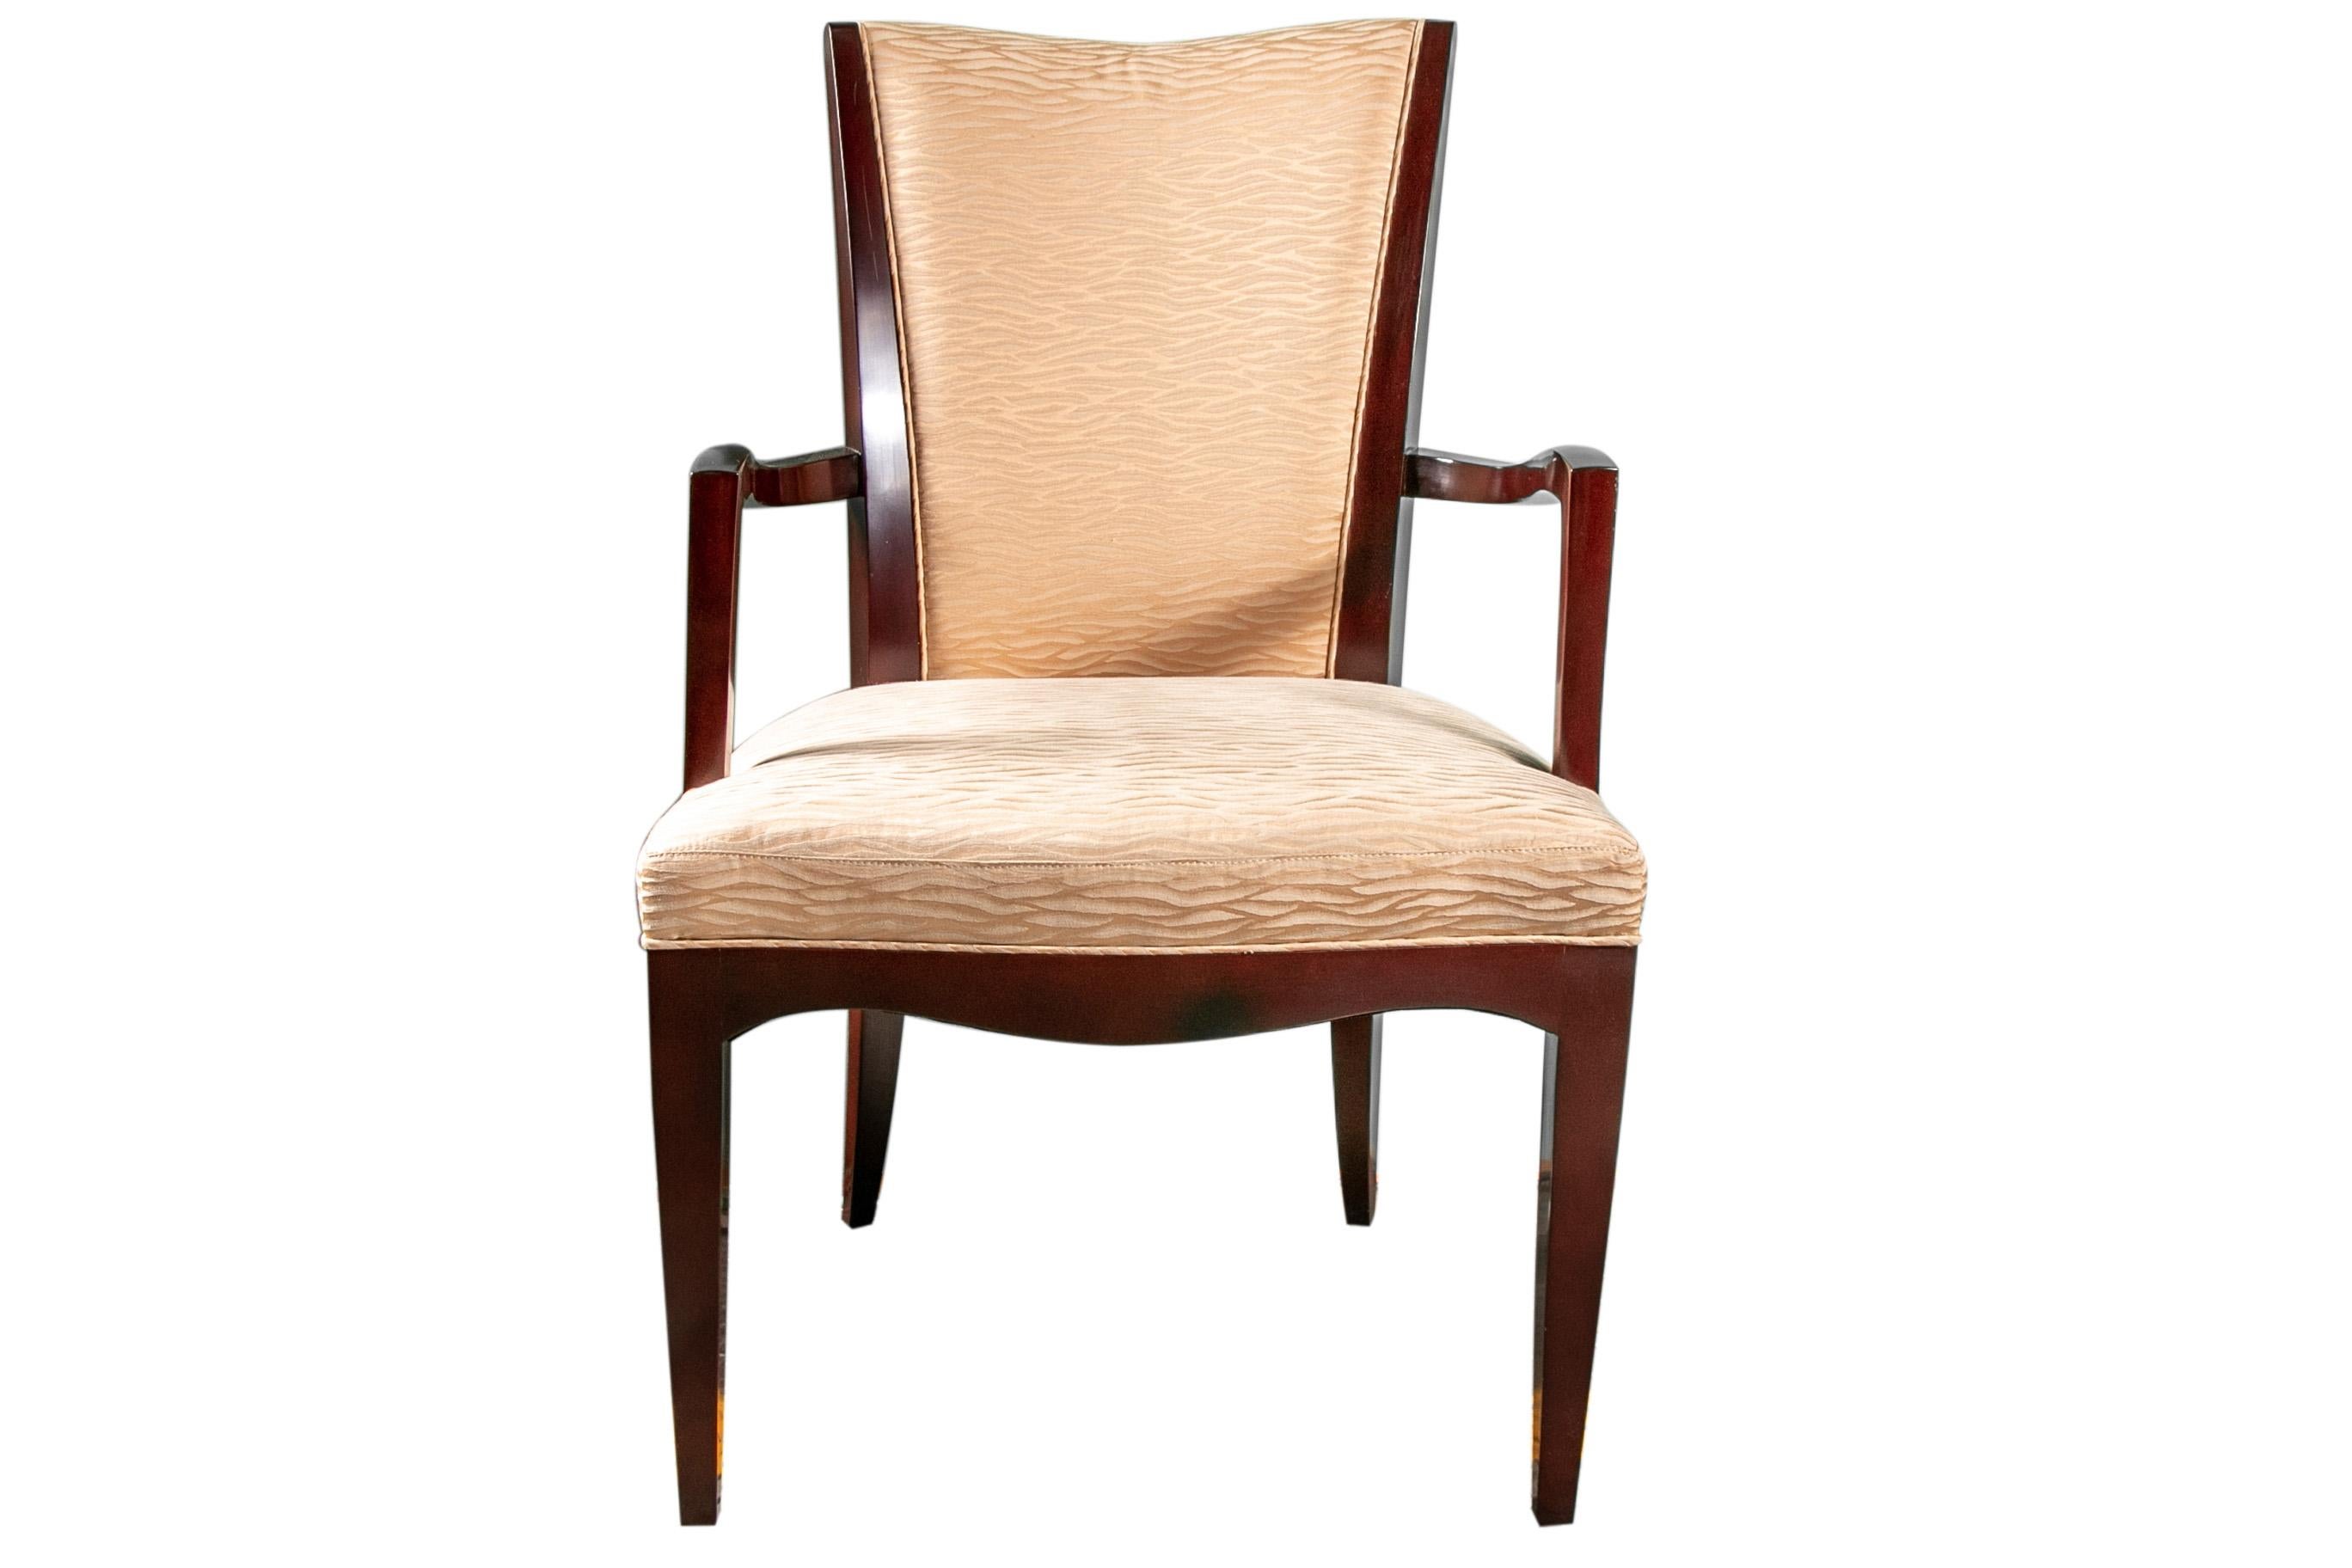 Two-arm and eight side chairs. Fine dark brown glossy stained frames with upholstered seats and back rests in a wavy pale yellow textured fabric. Raised on square tapering legs. Labels underneath.

Condition: One side chair crest rail end chipped,